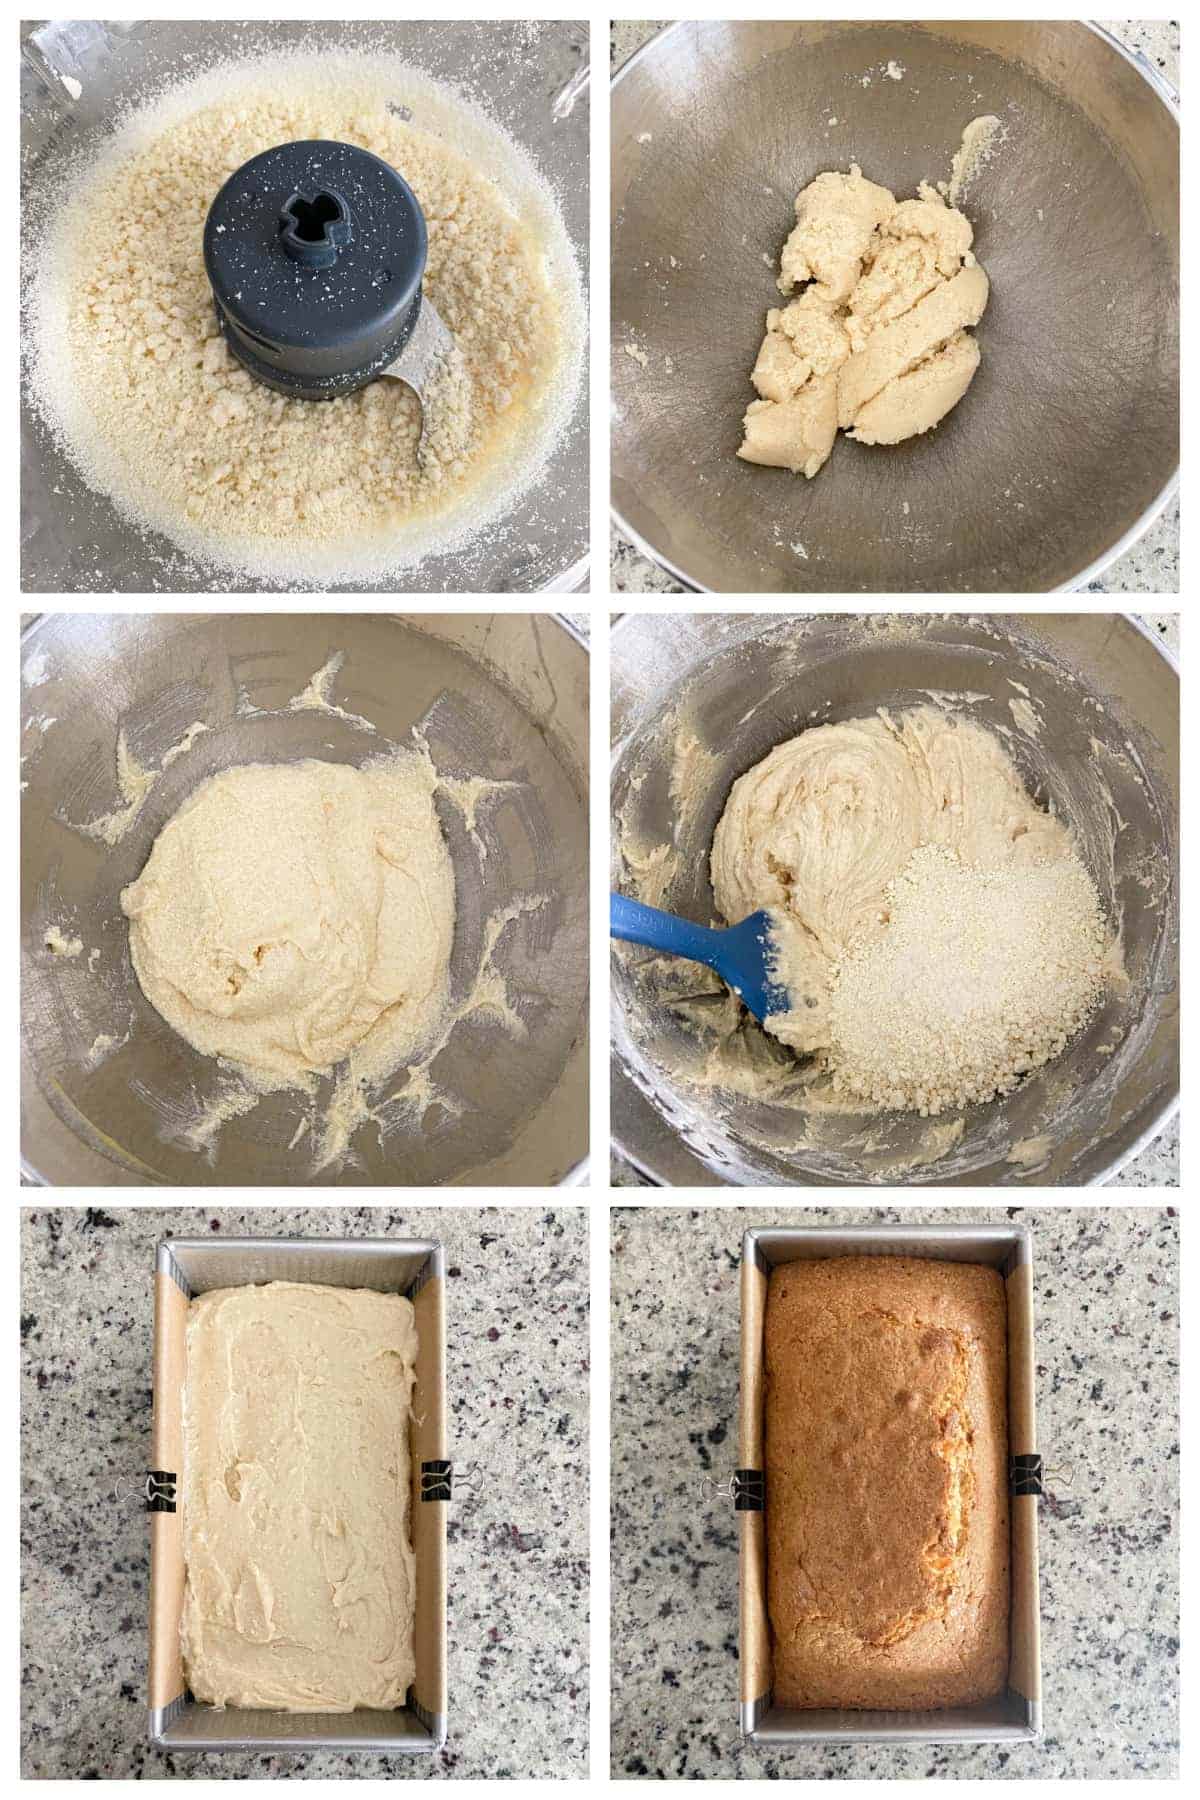 Collage of photos showing the steps to making the cake.